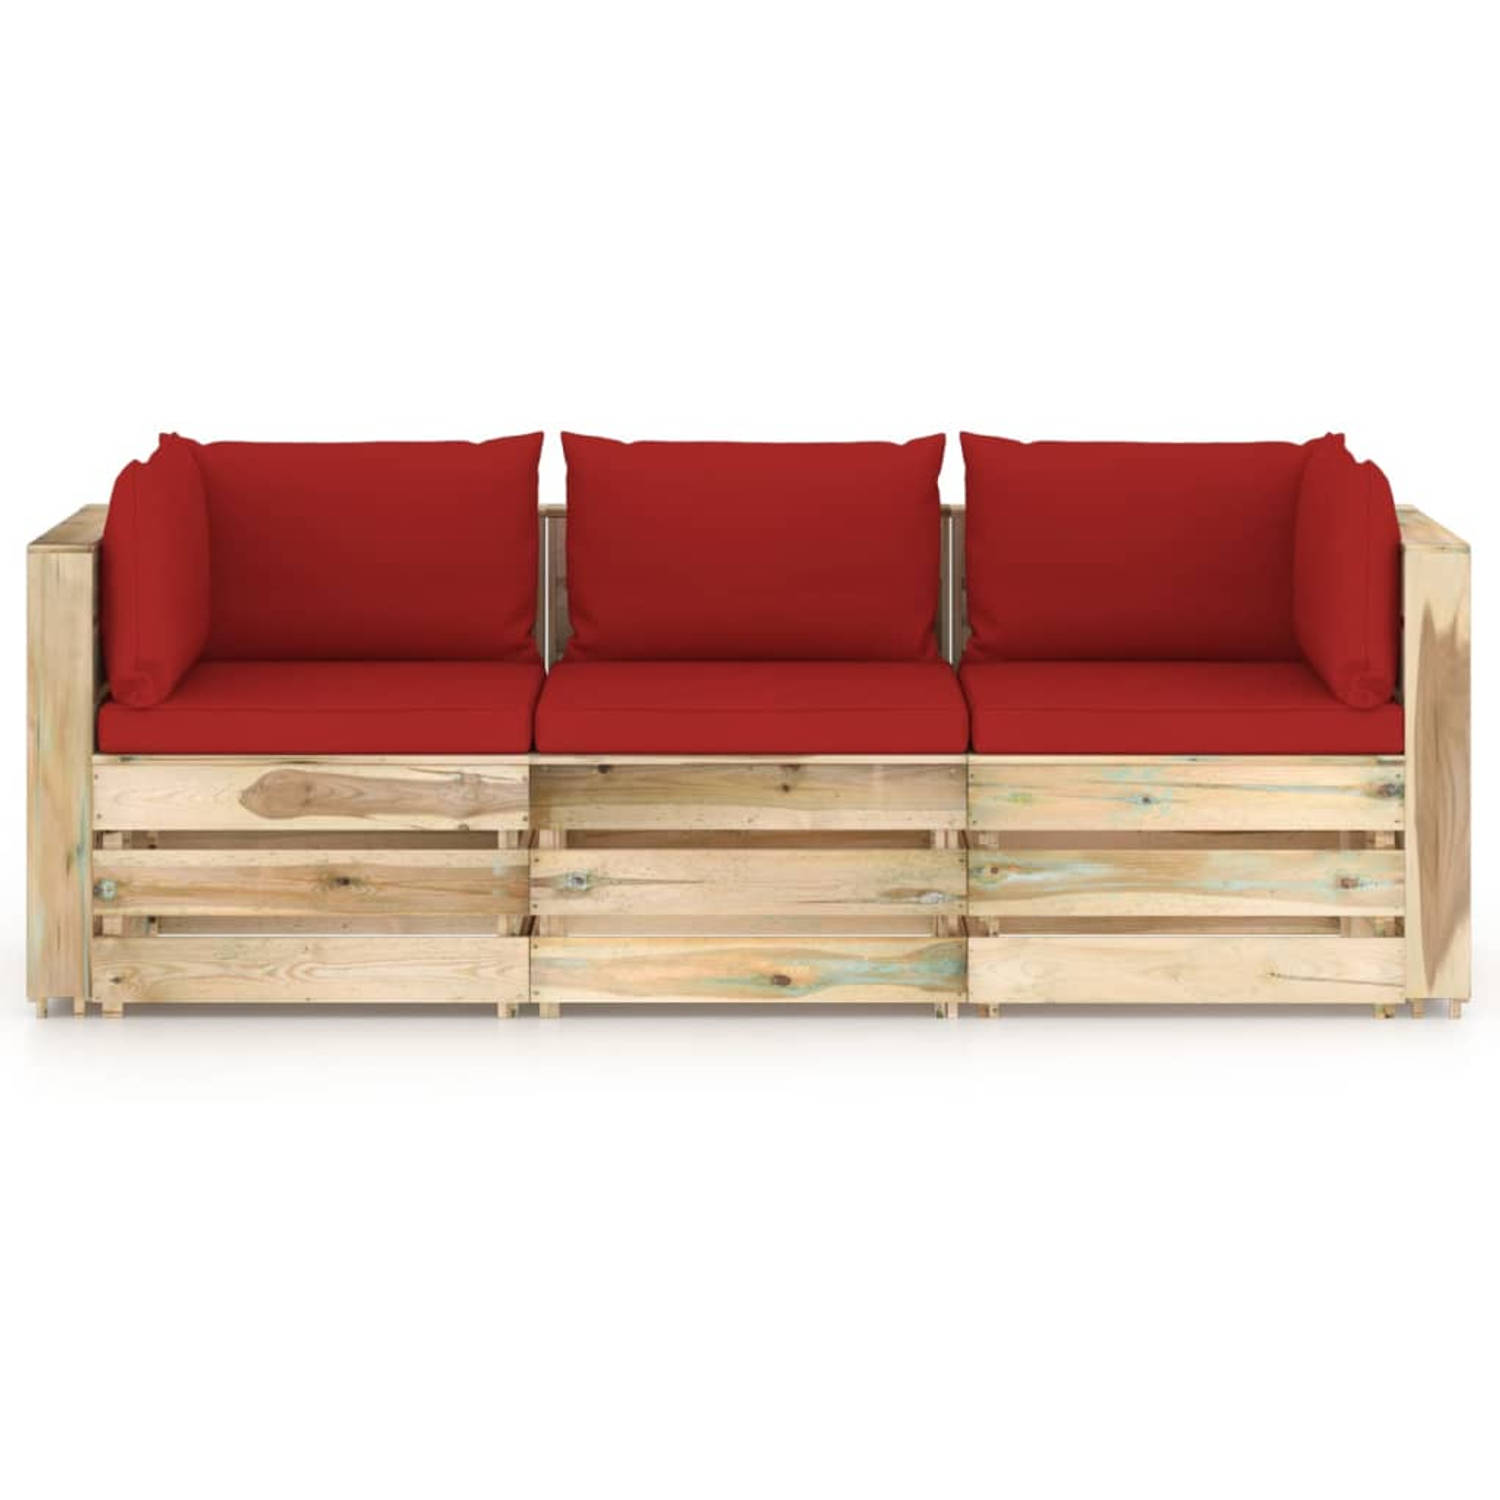 The Living Store Palletbank - Grenenhout - 69 x 70 x 66 cm - Rood kussen